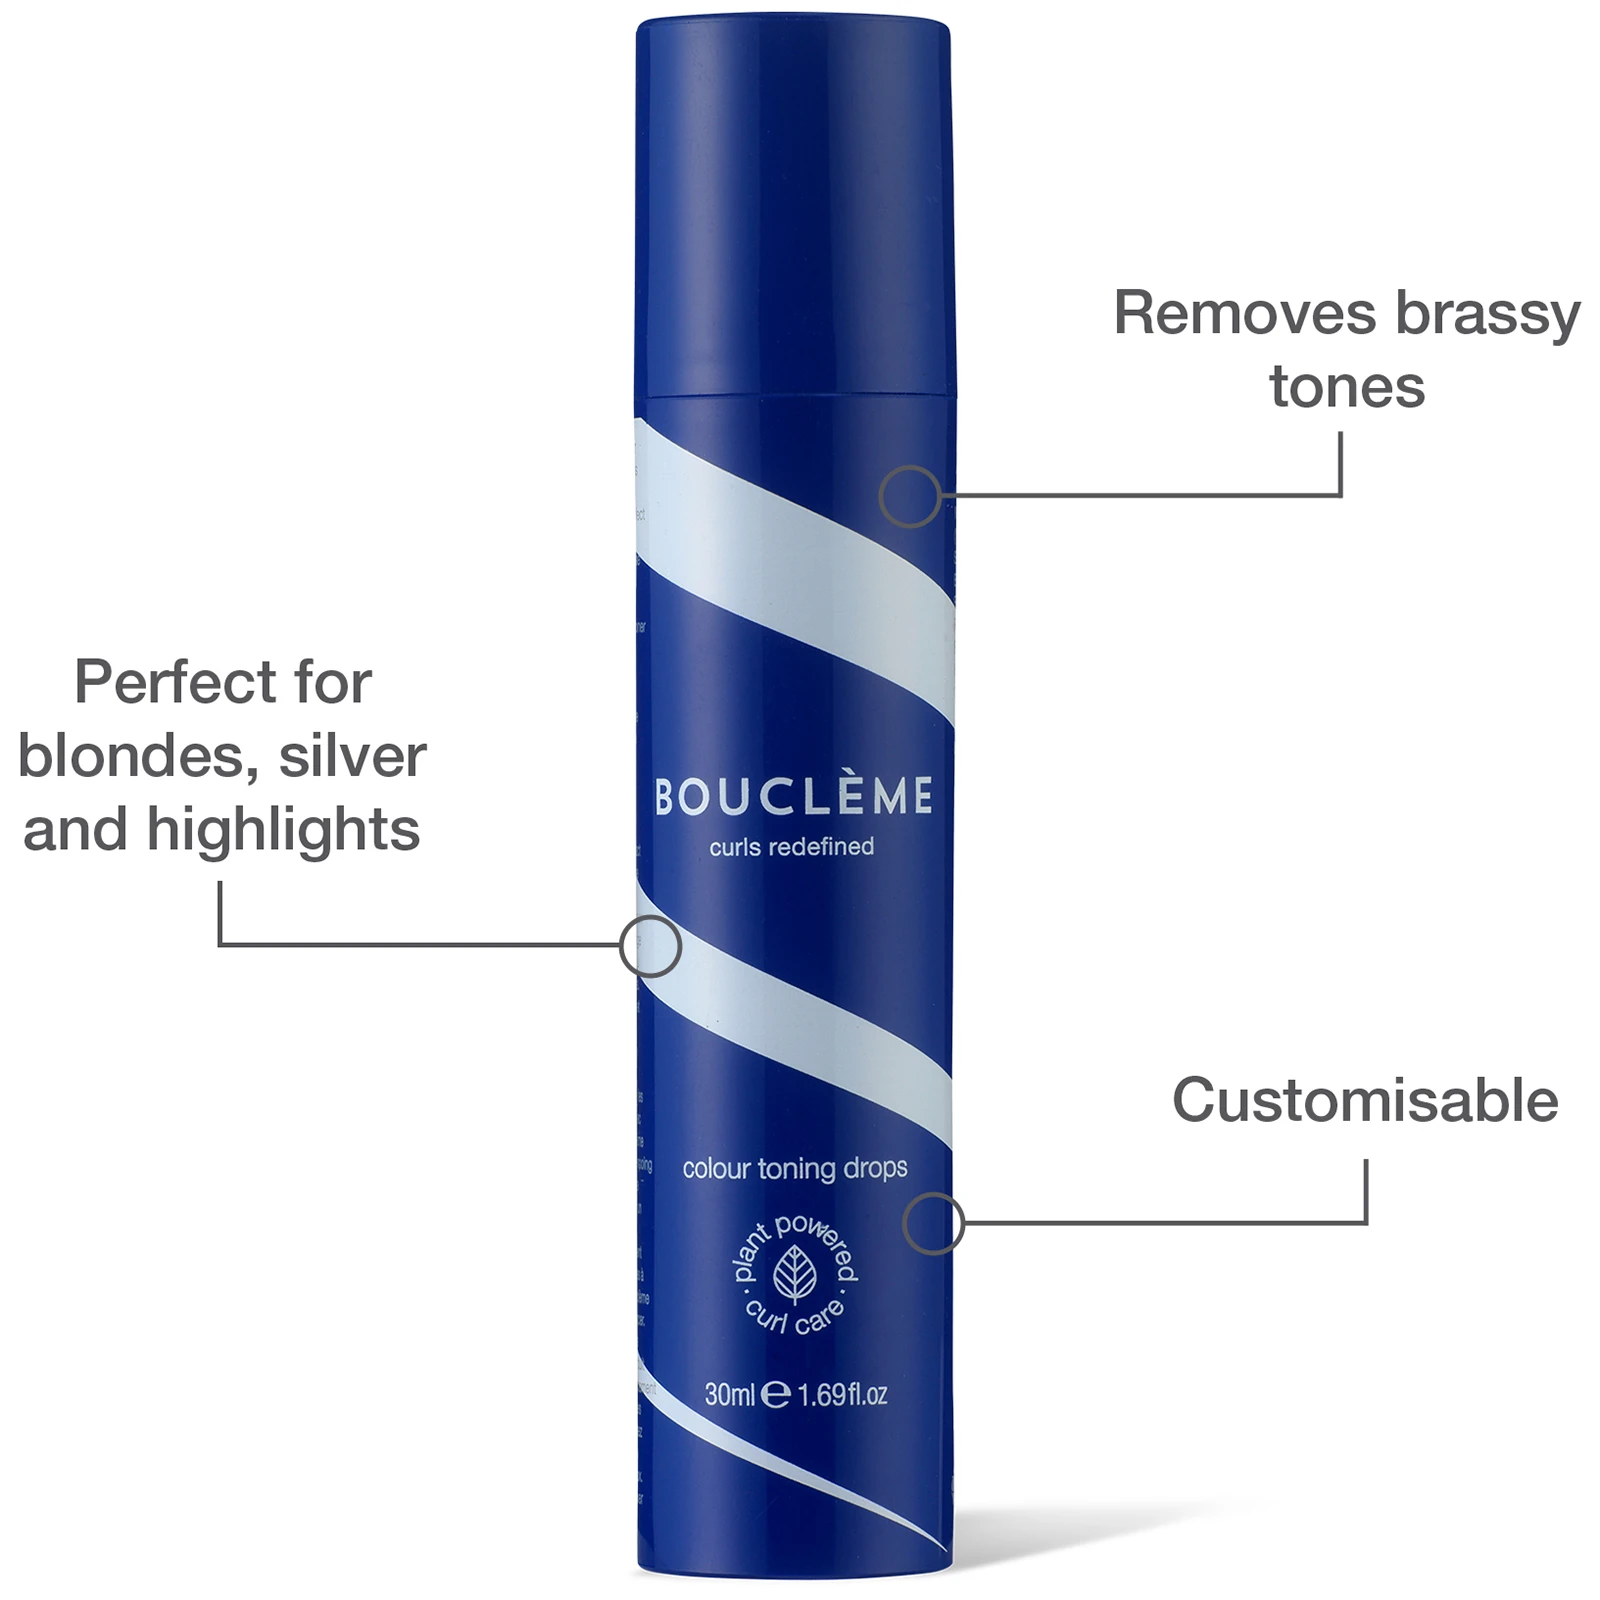 removes brassy tones, perfect for blondes, silver and highlights, customisable.